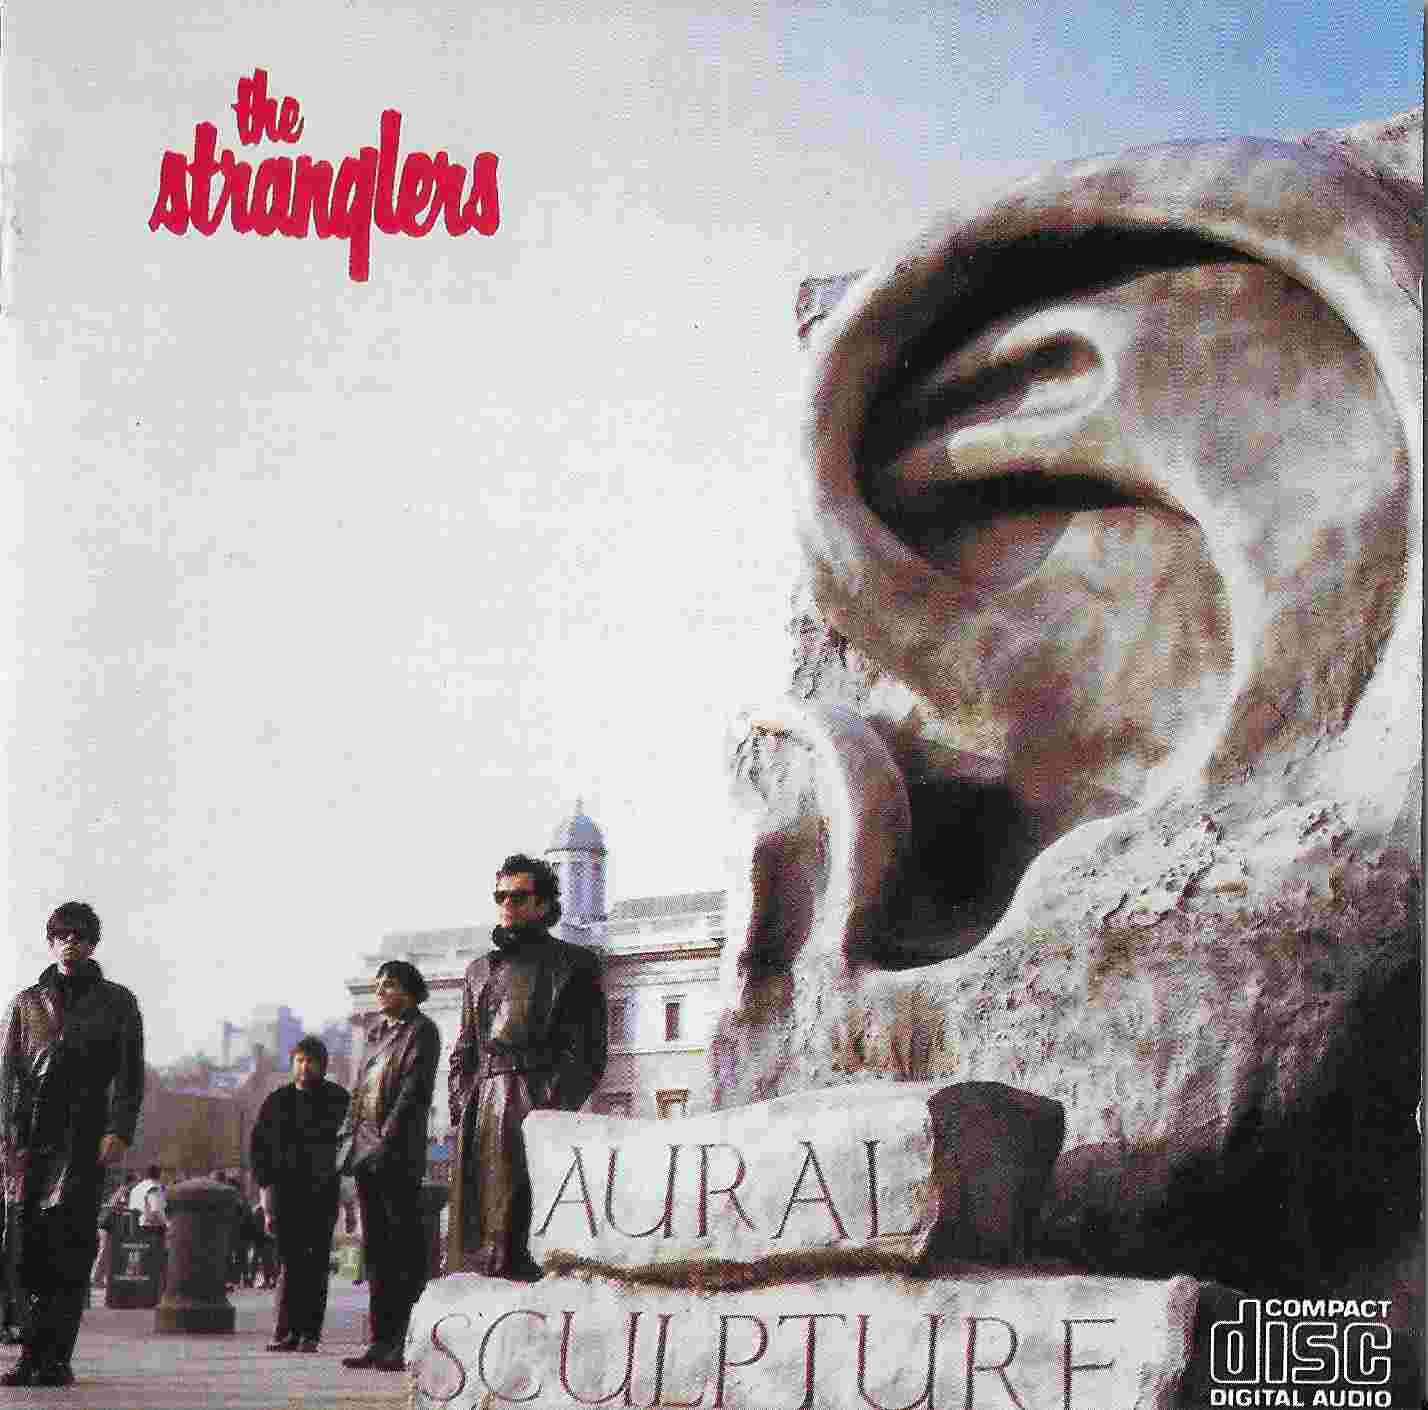 Picture of Aural sculpture by artist The Stranglers from The Stranglers cds